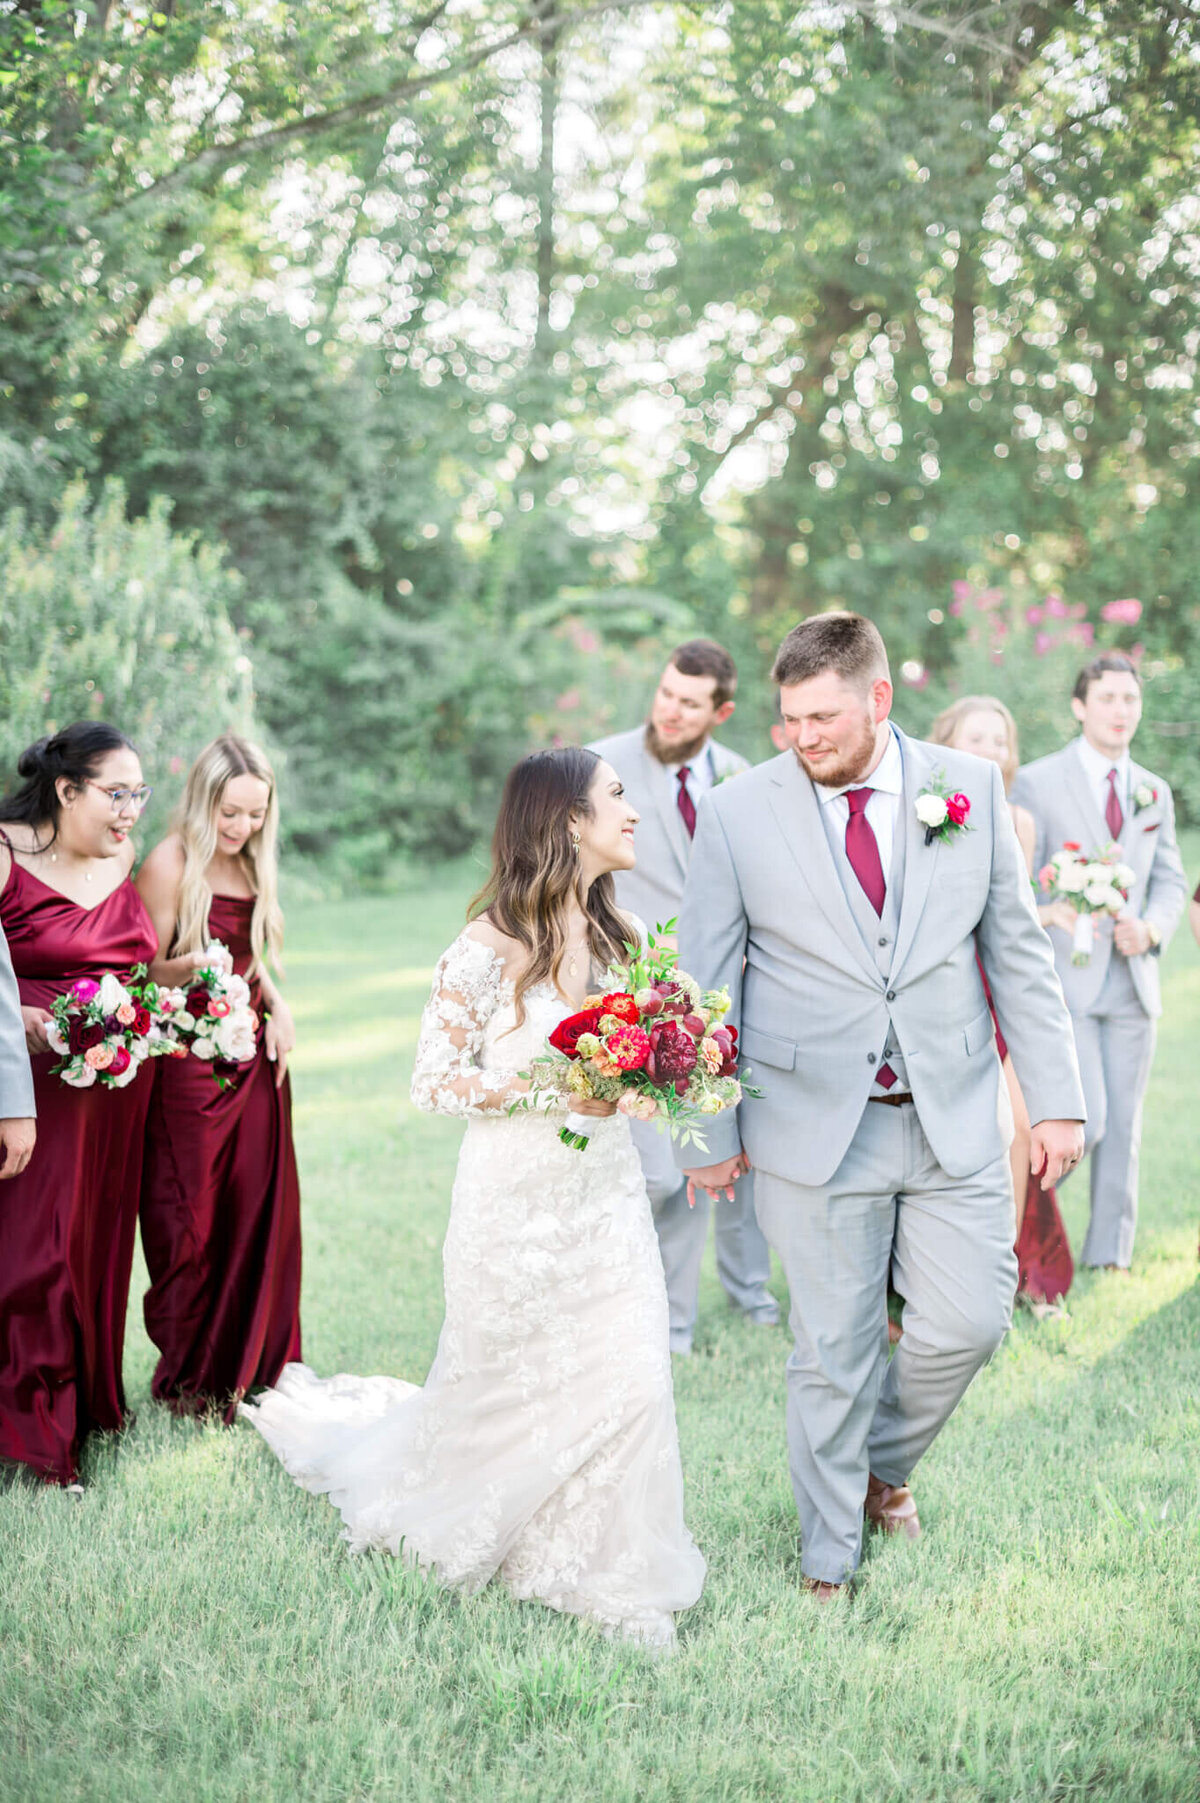 bridal party photo focused on bride and groom while their bridesmaids and groomsmen follow behind